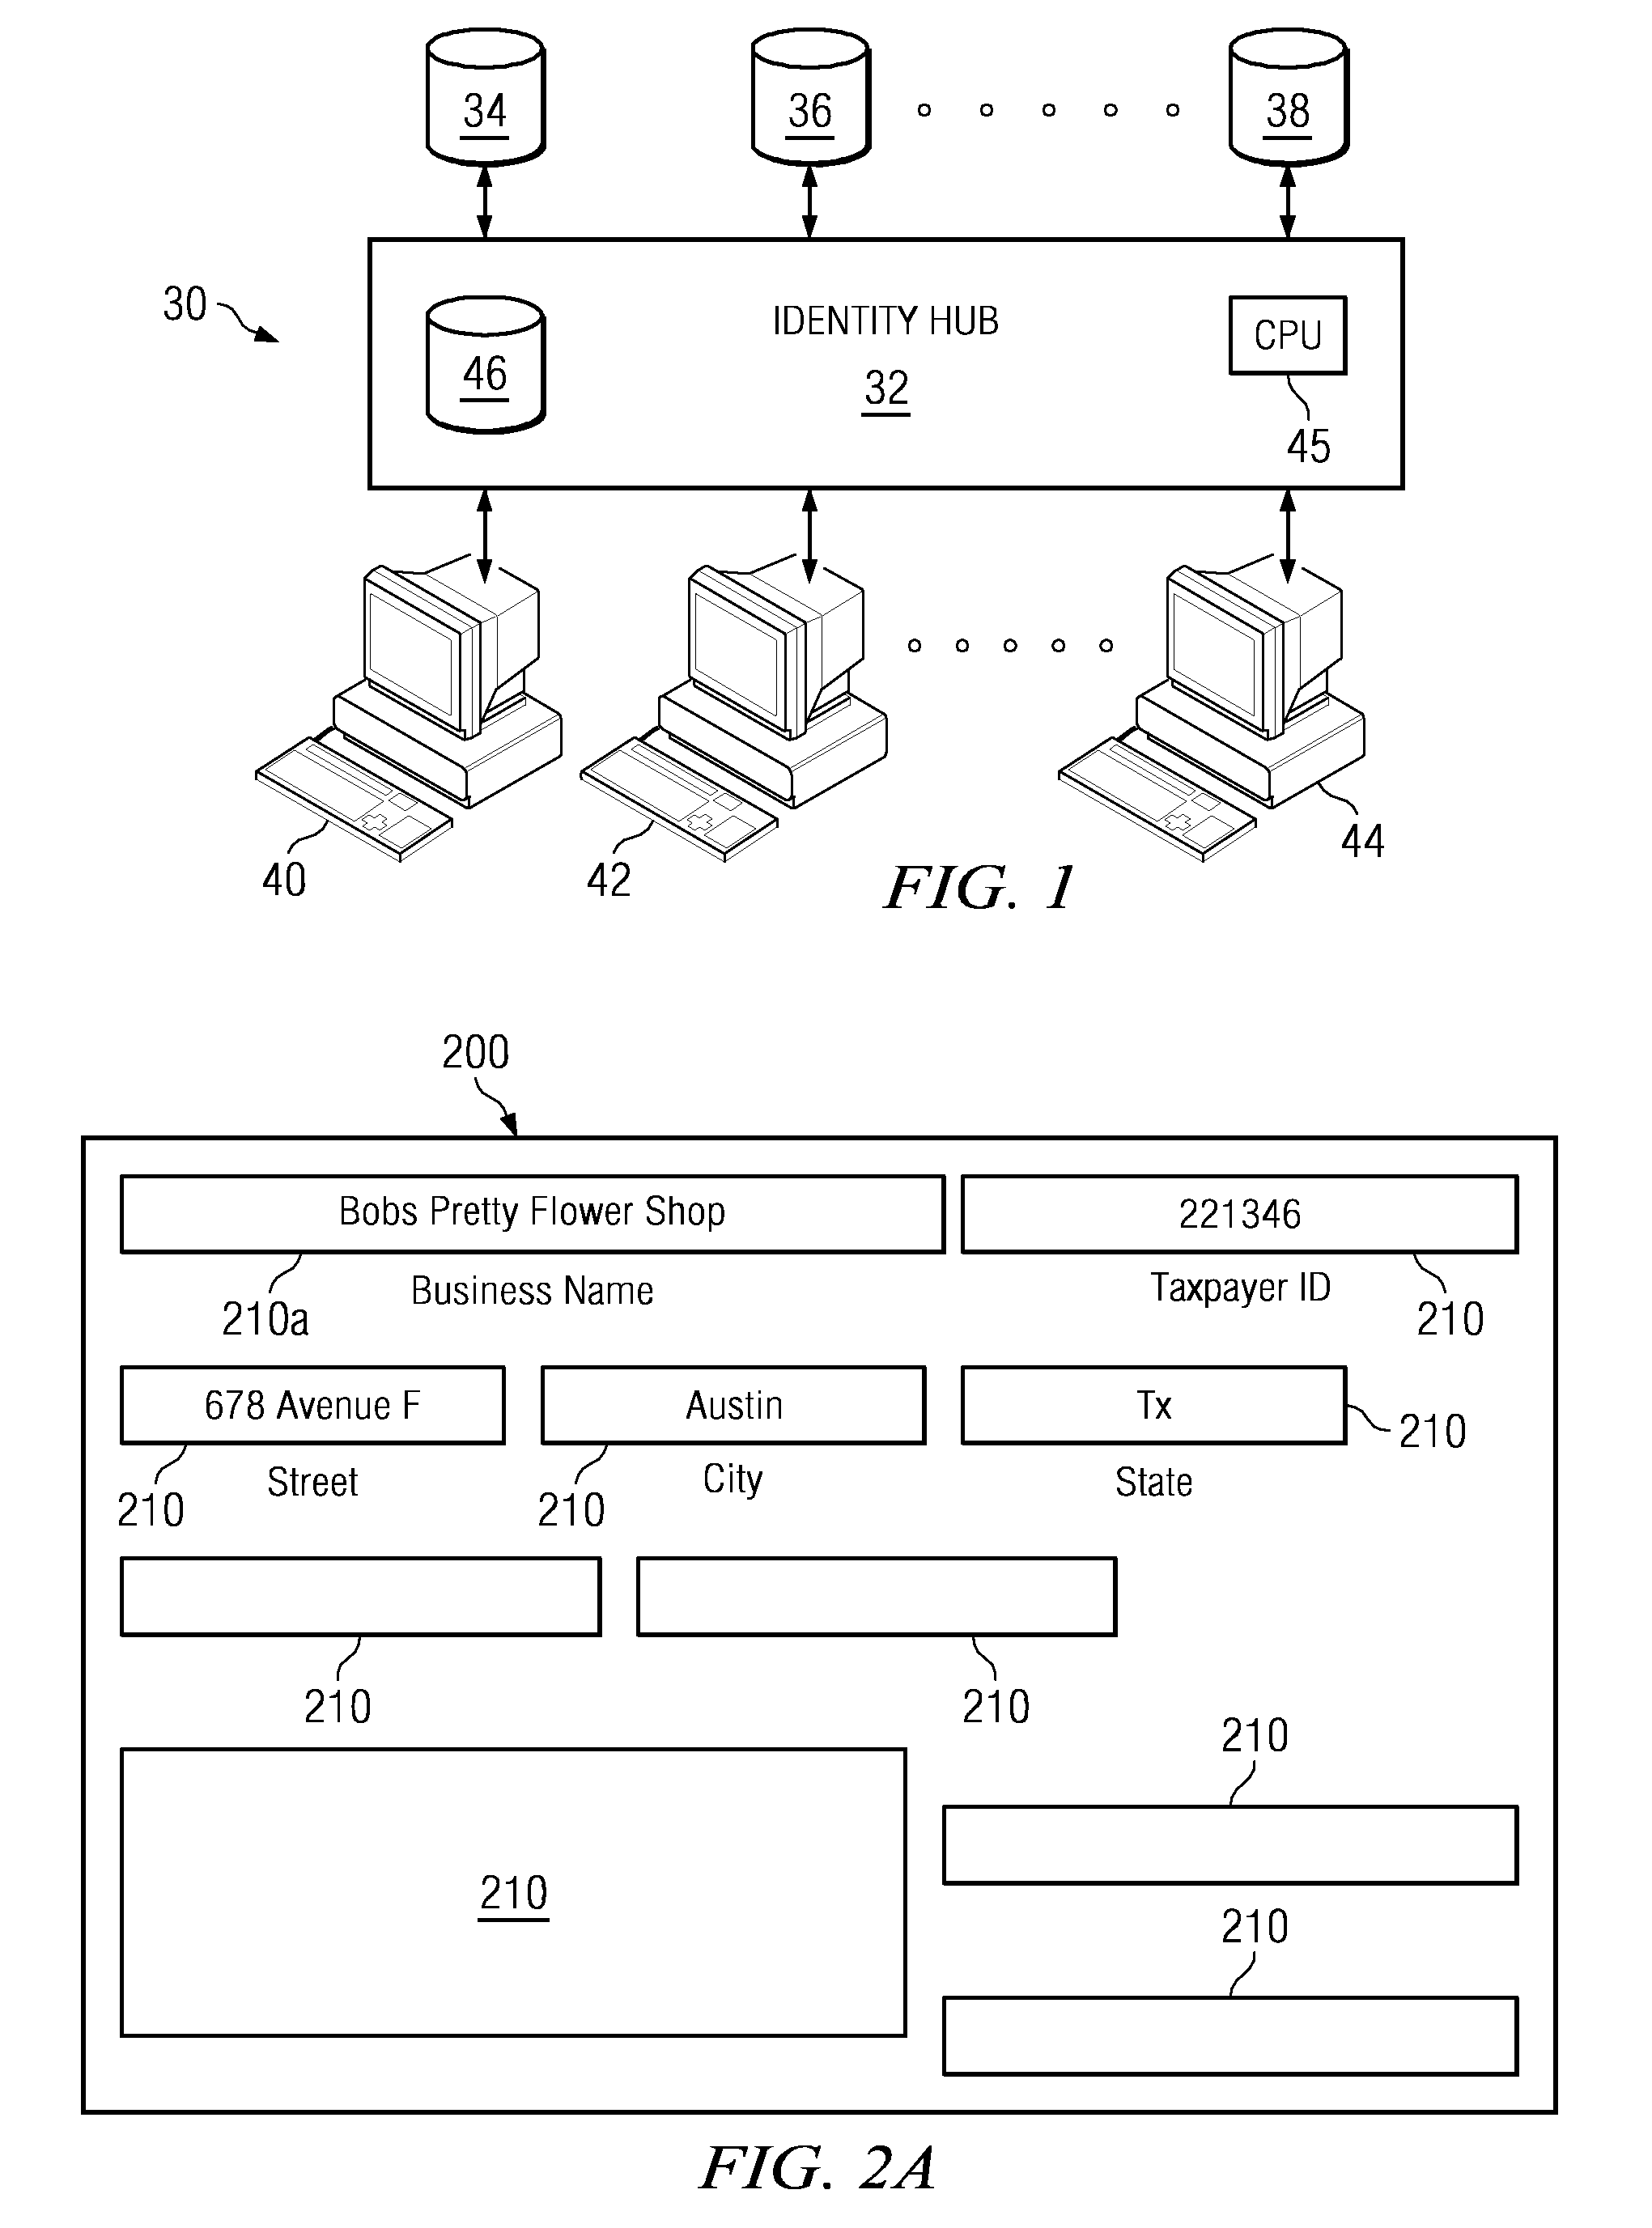 Method and system for analysis of a system for matching data records